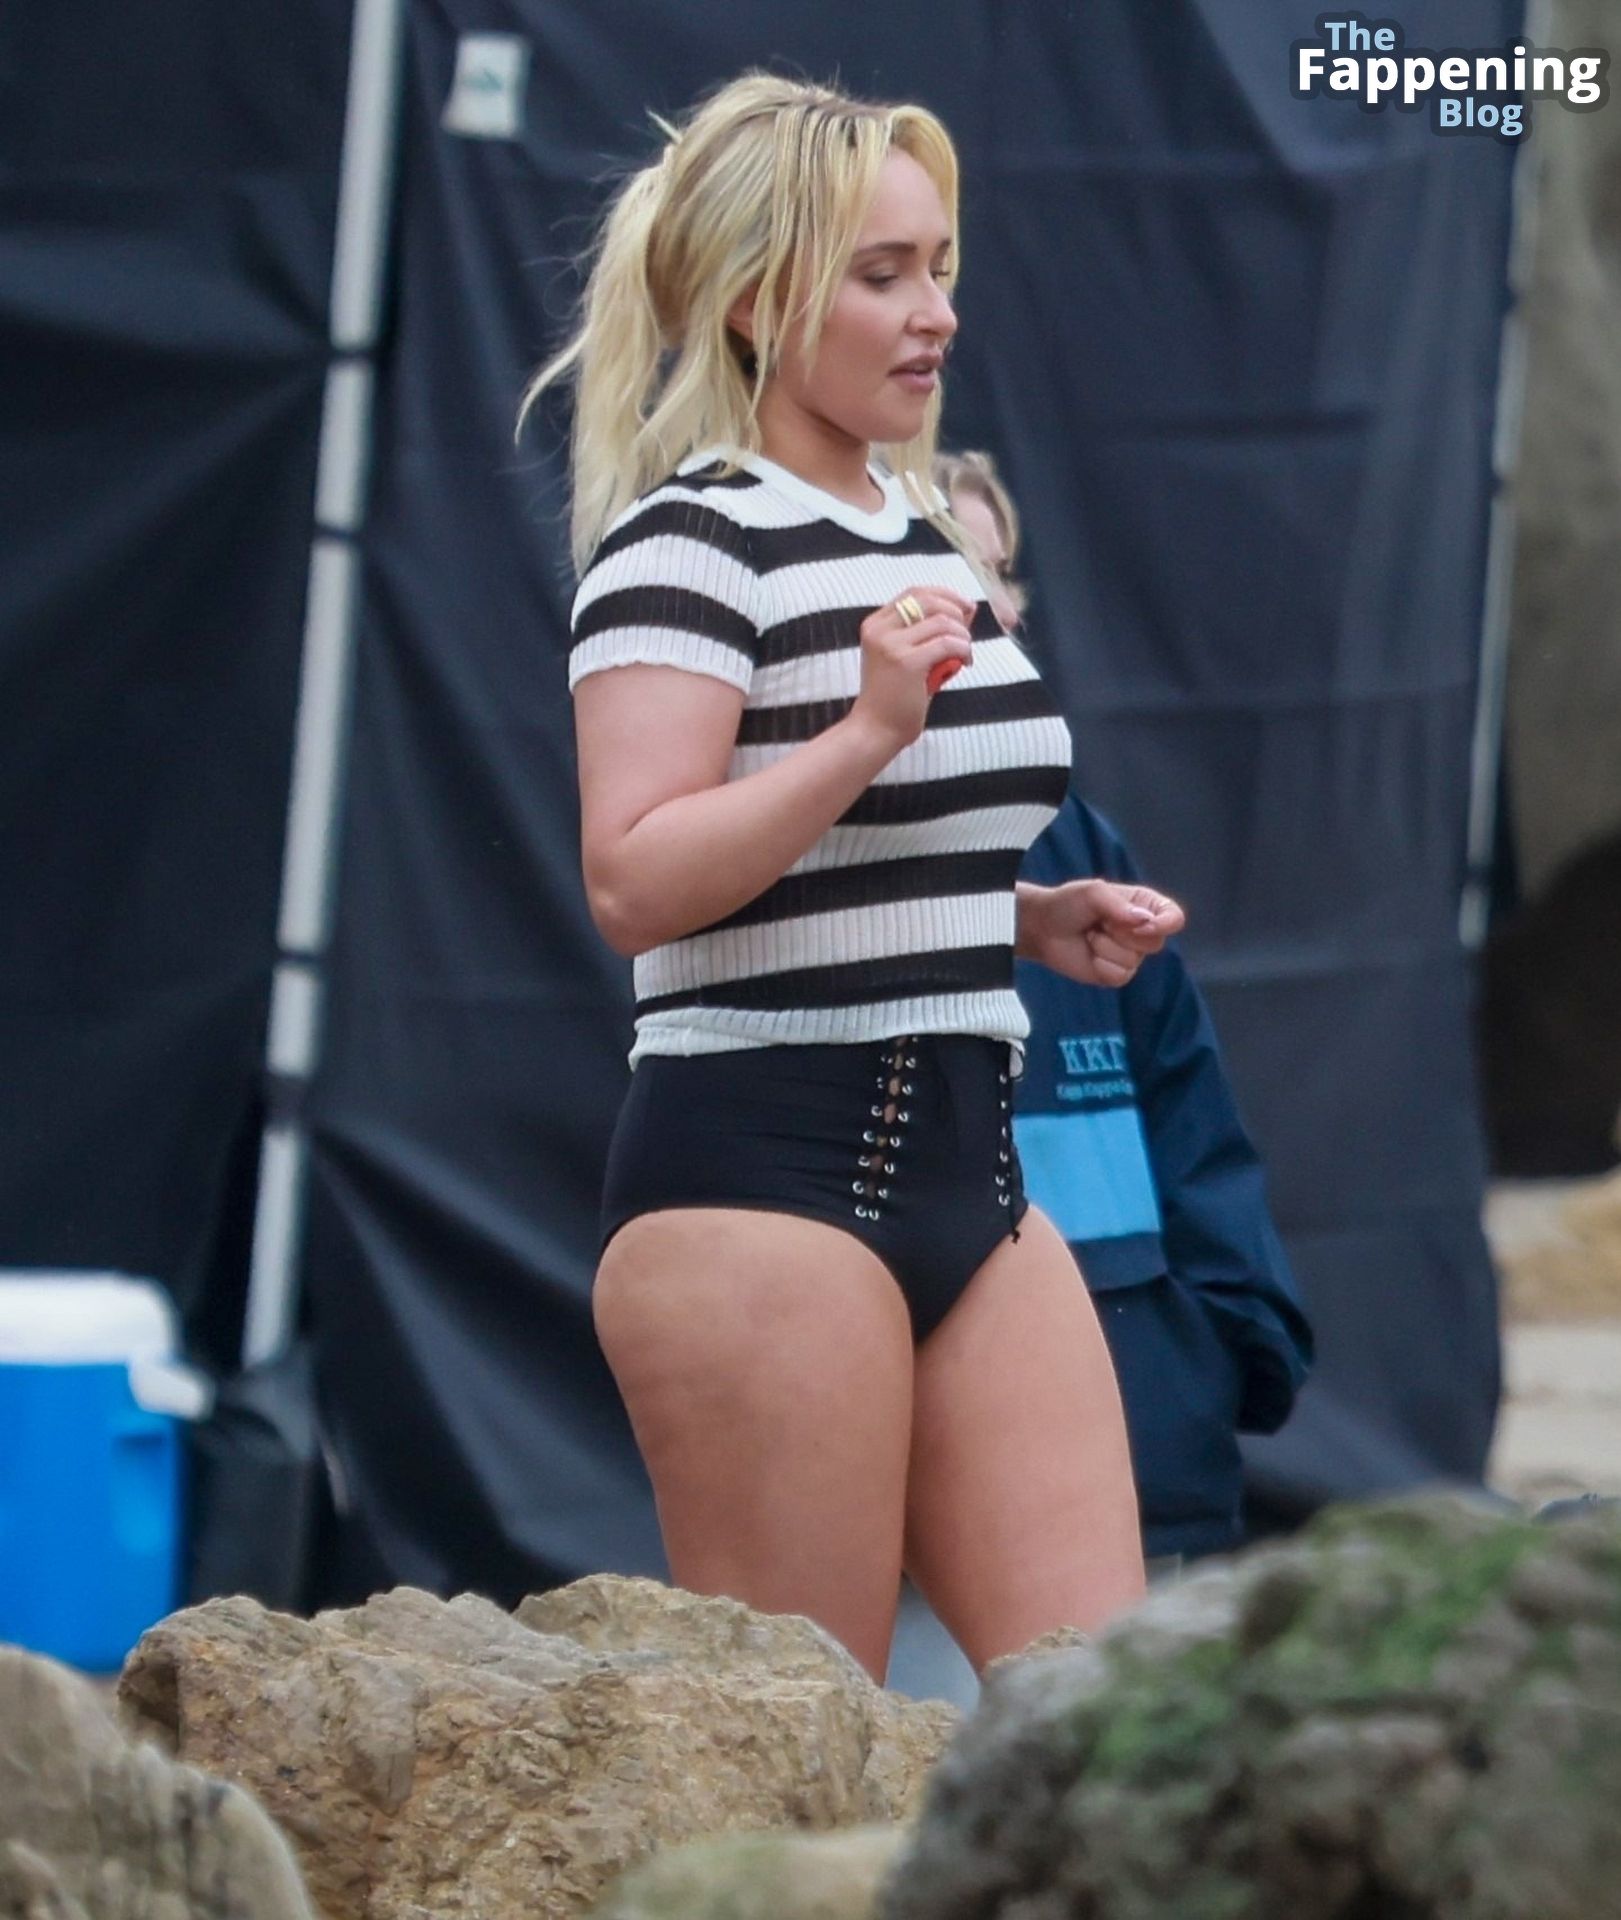 Hayden-Panettiere-Sexy-The-Fappening-Blog-36.jpg